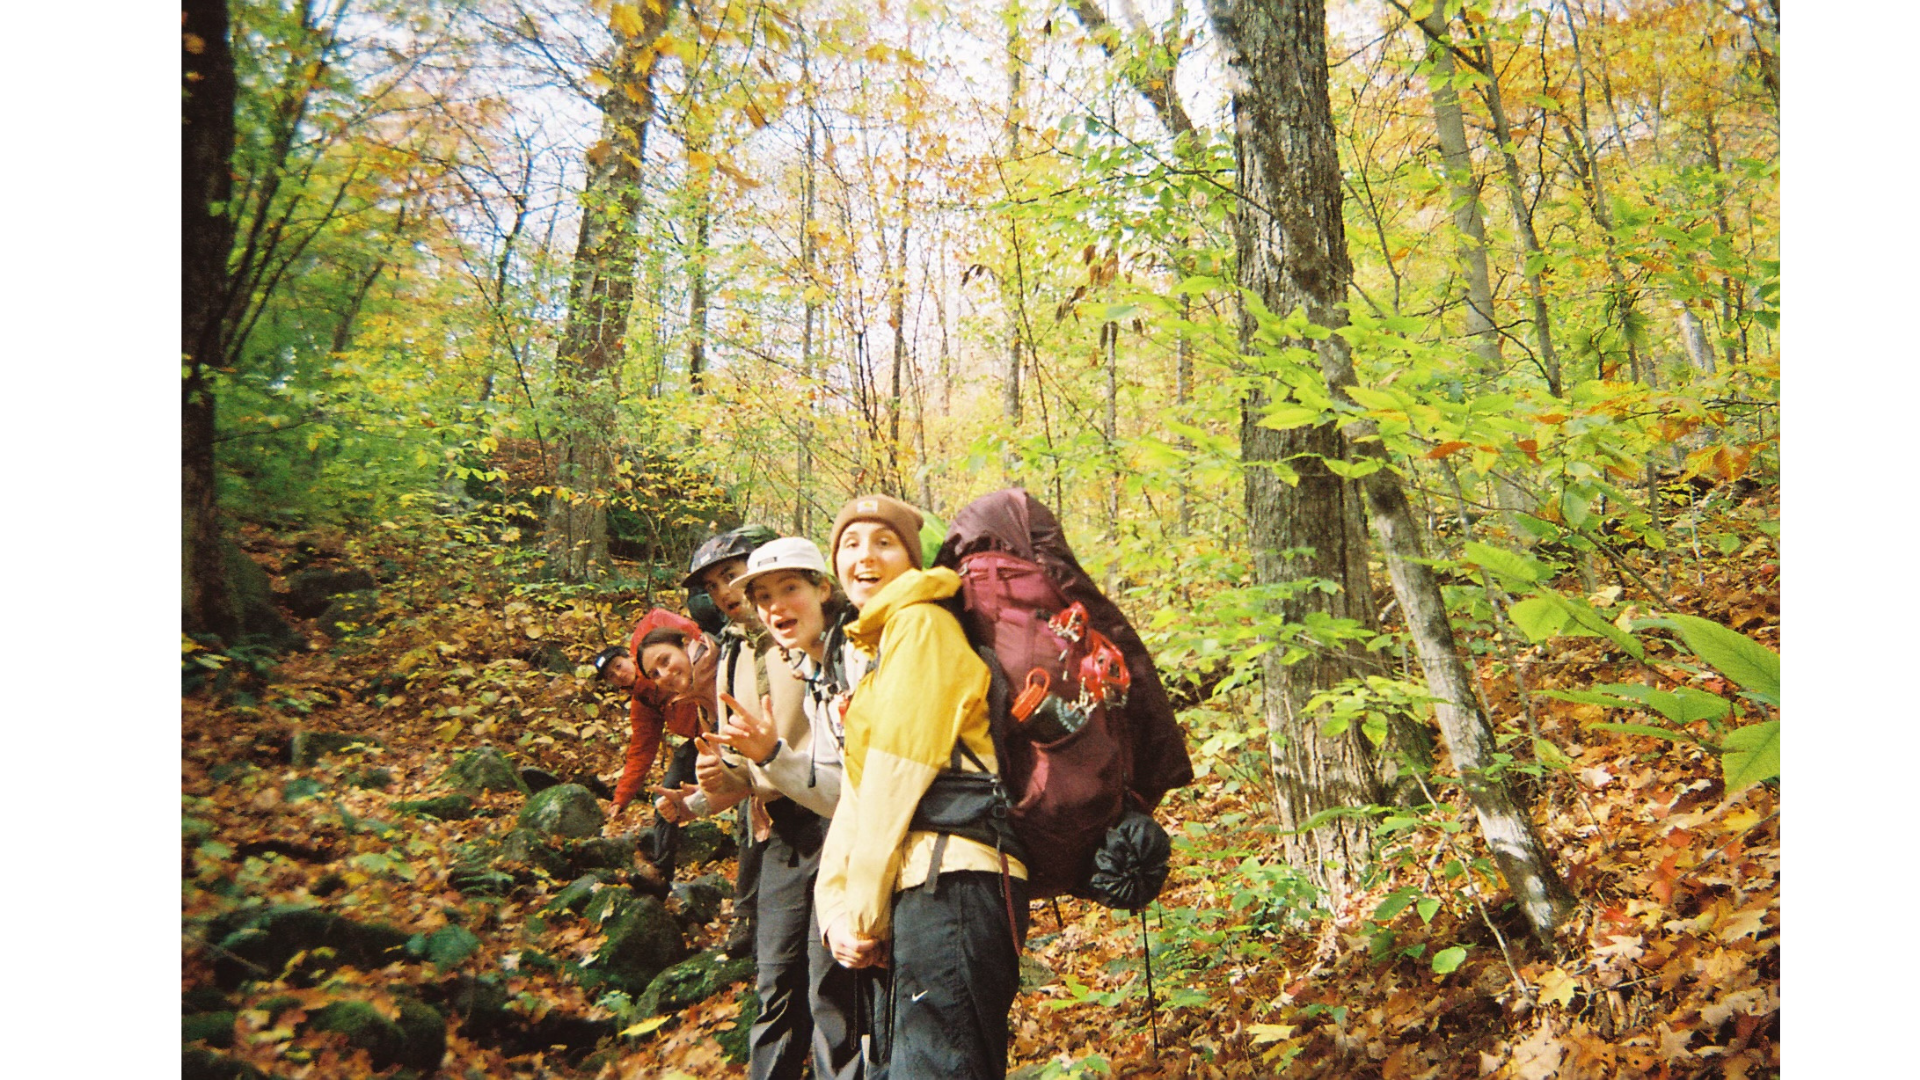 a group of three people in the middle of the frame, with the first one wearing a yellow raincoat and a hiking backpack